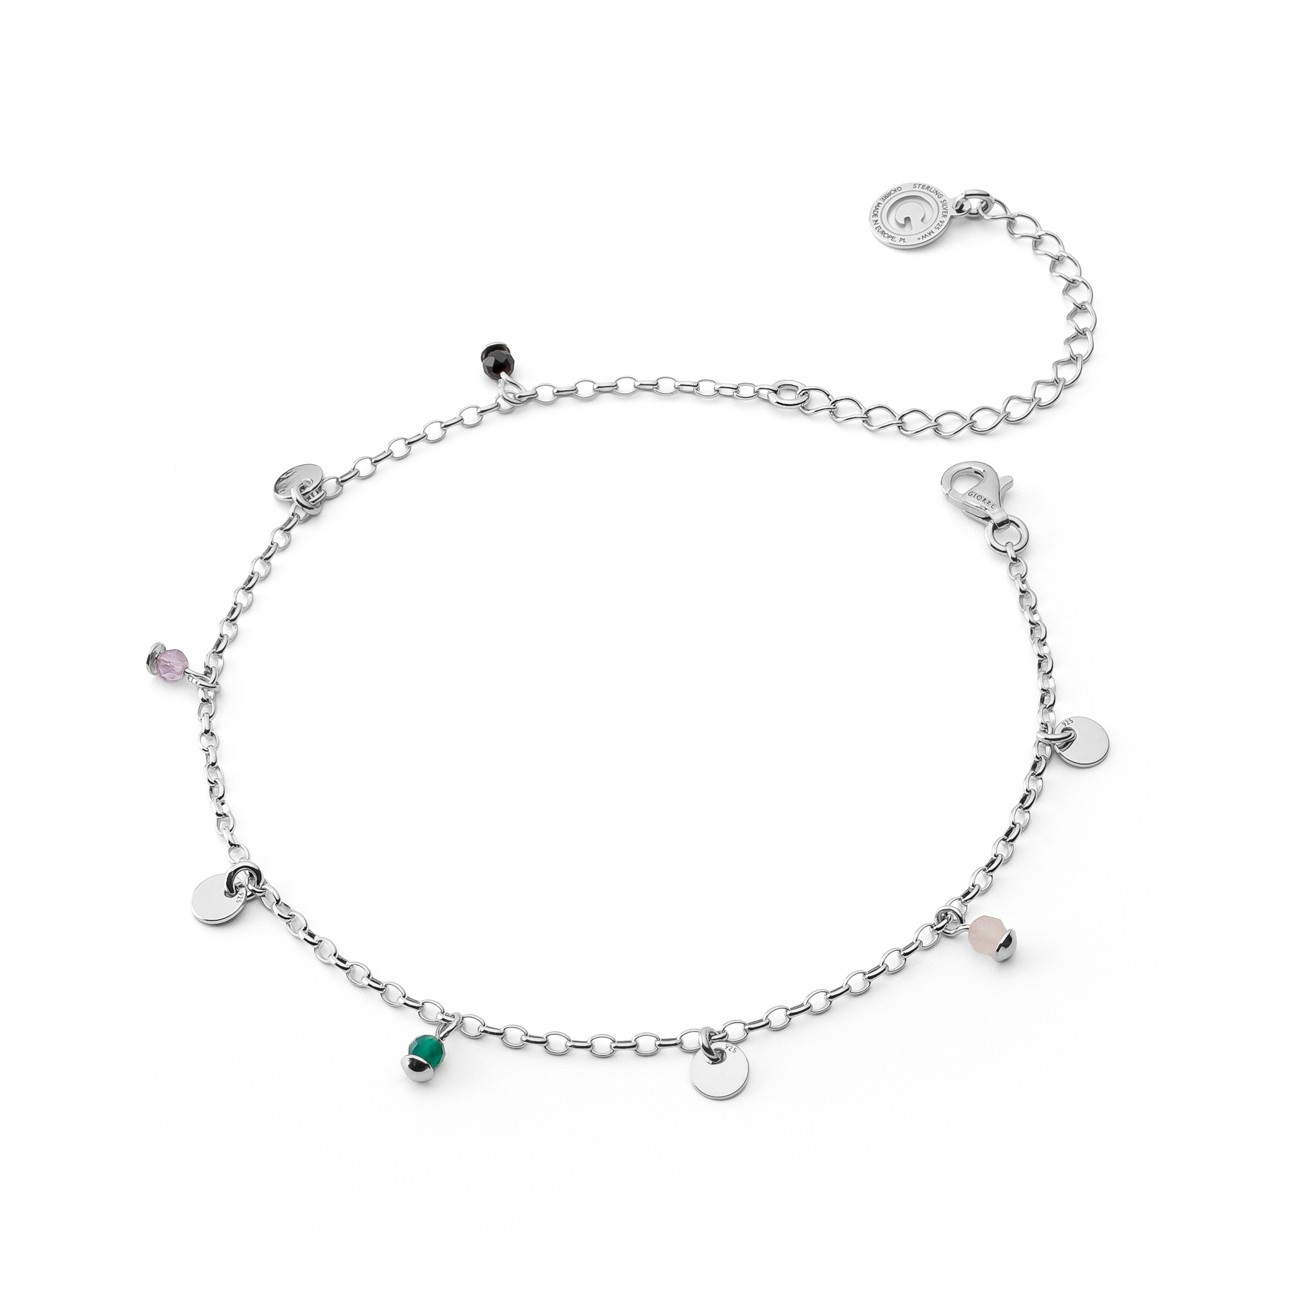 An ankle bracelet with plaques and colored stones, sterling silver 925